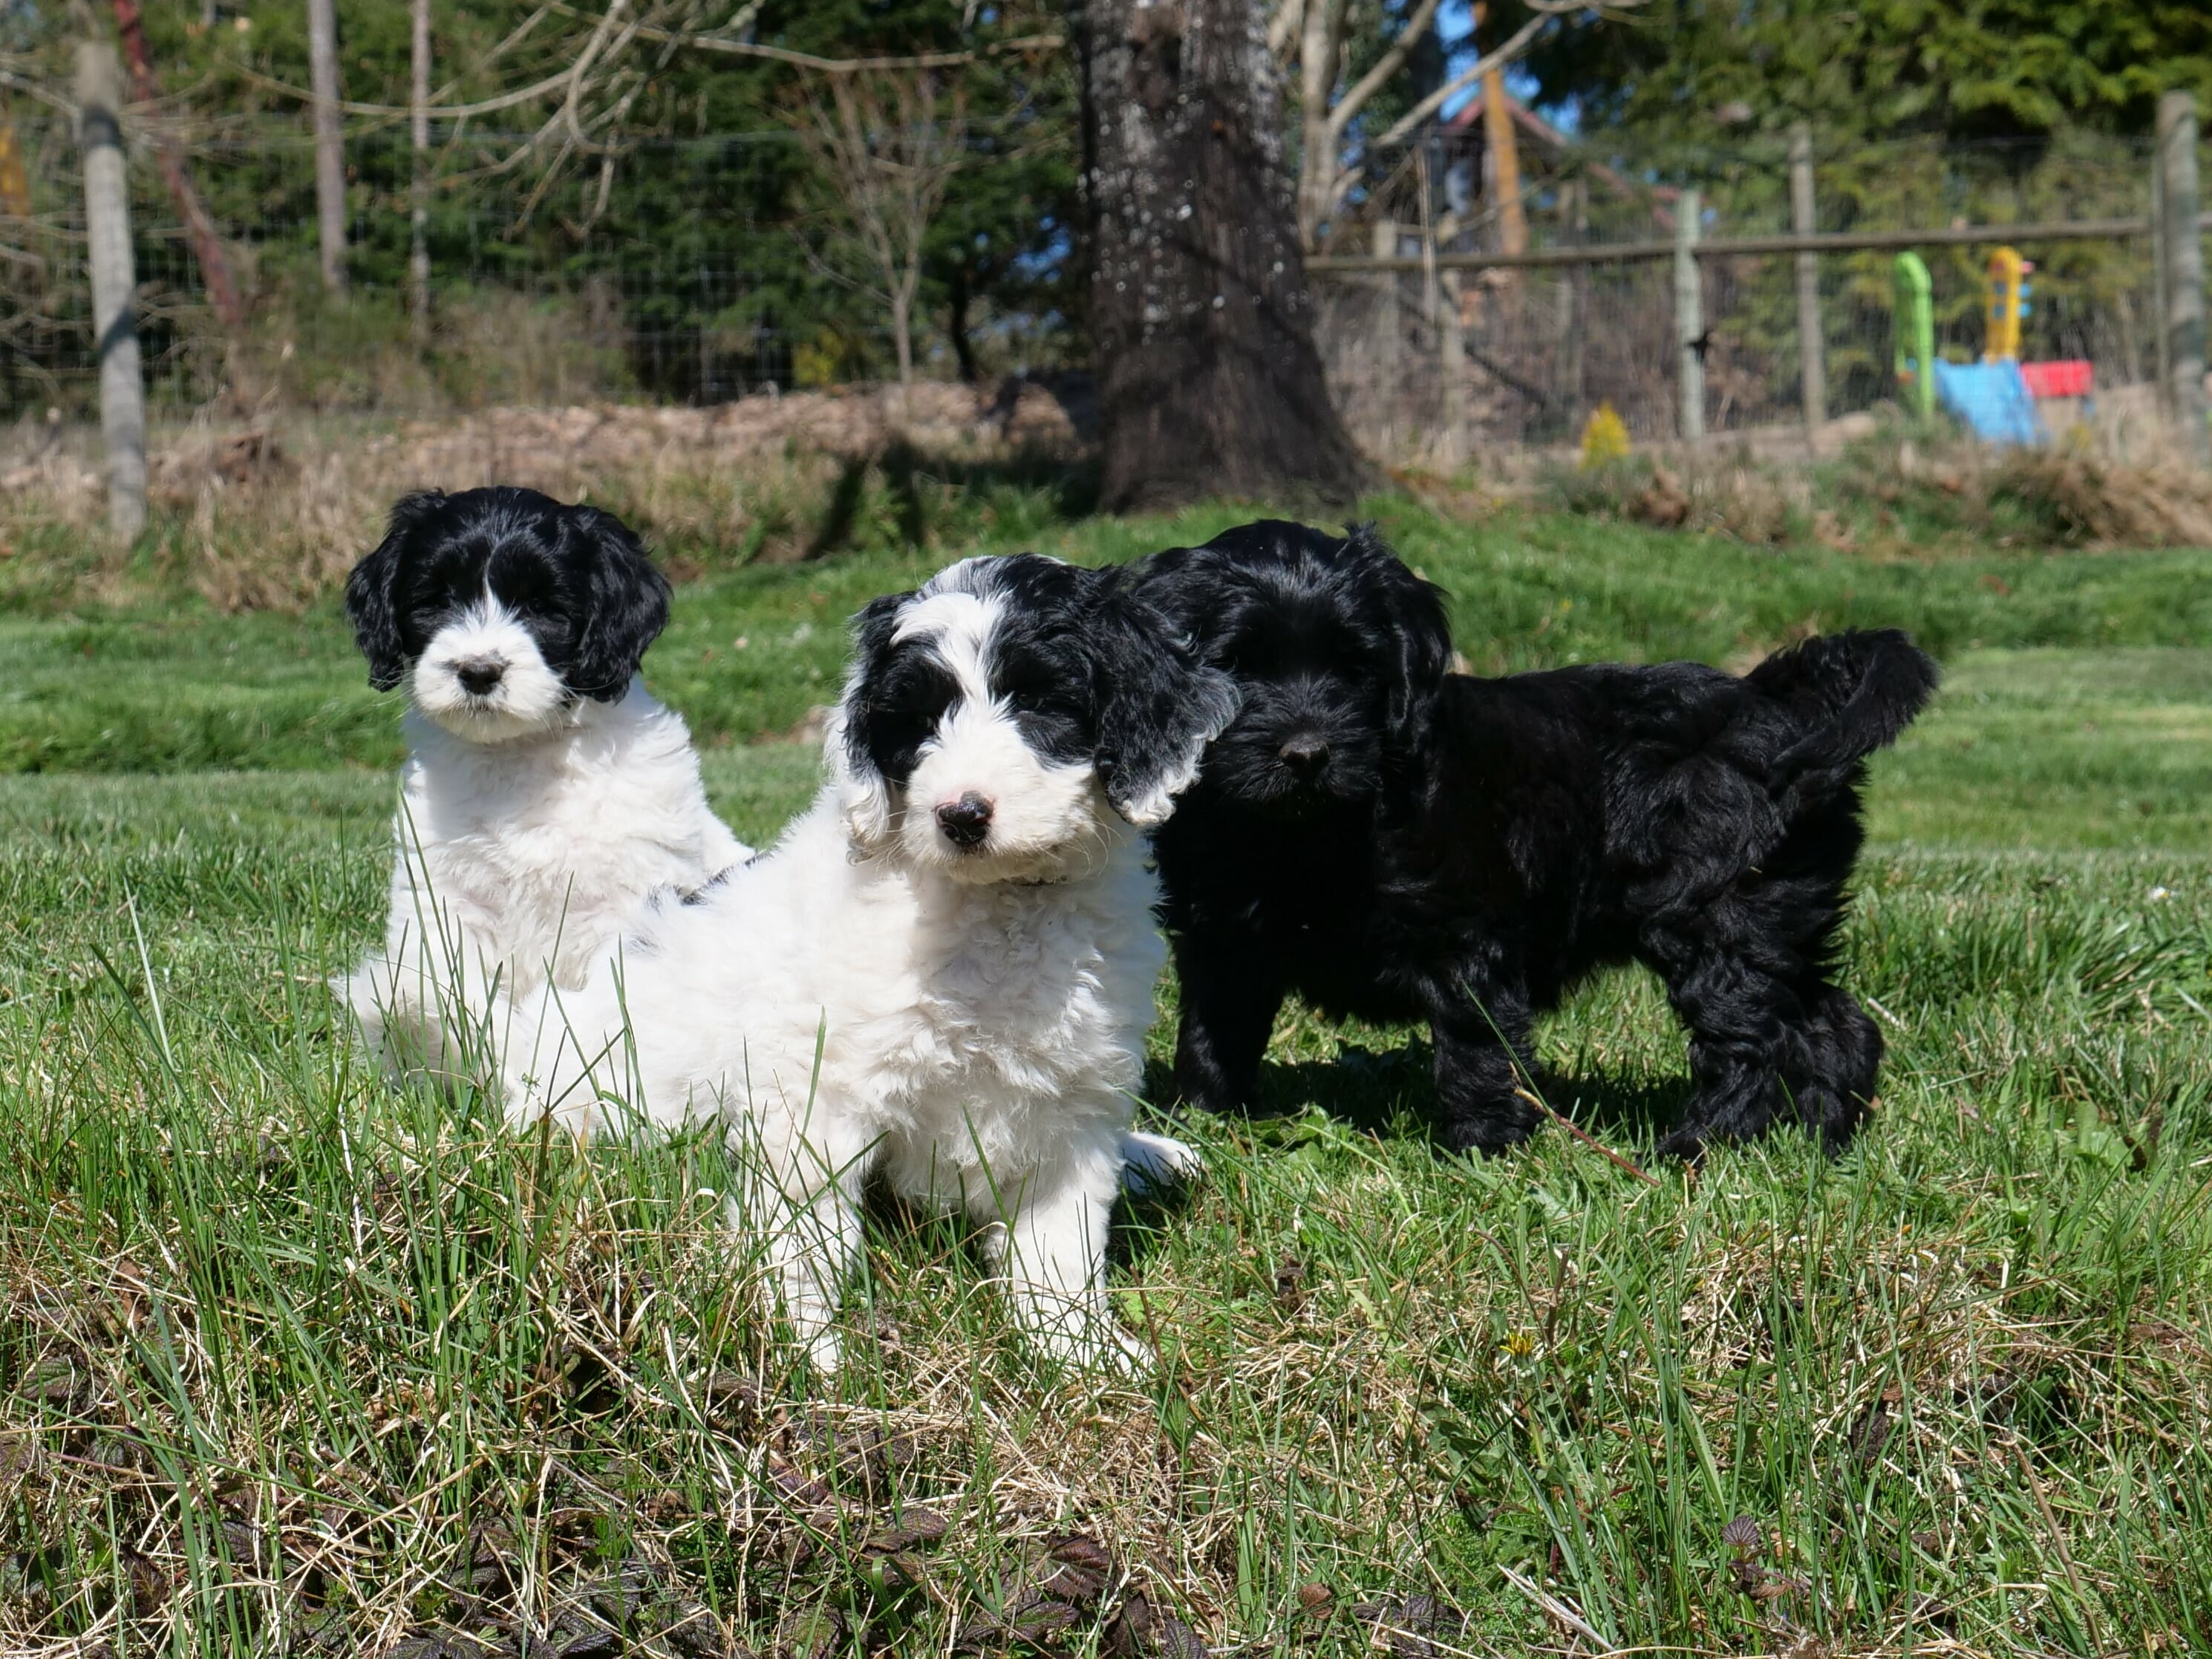 Three 7-week old labradoodle puppies are sitting in green grass looking towards the camera. On the left, a white puppy who has a black head. Middle puppy is white with asymmetrical black patches over both eyes. On the left and behind, a solid black puppy.